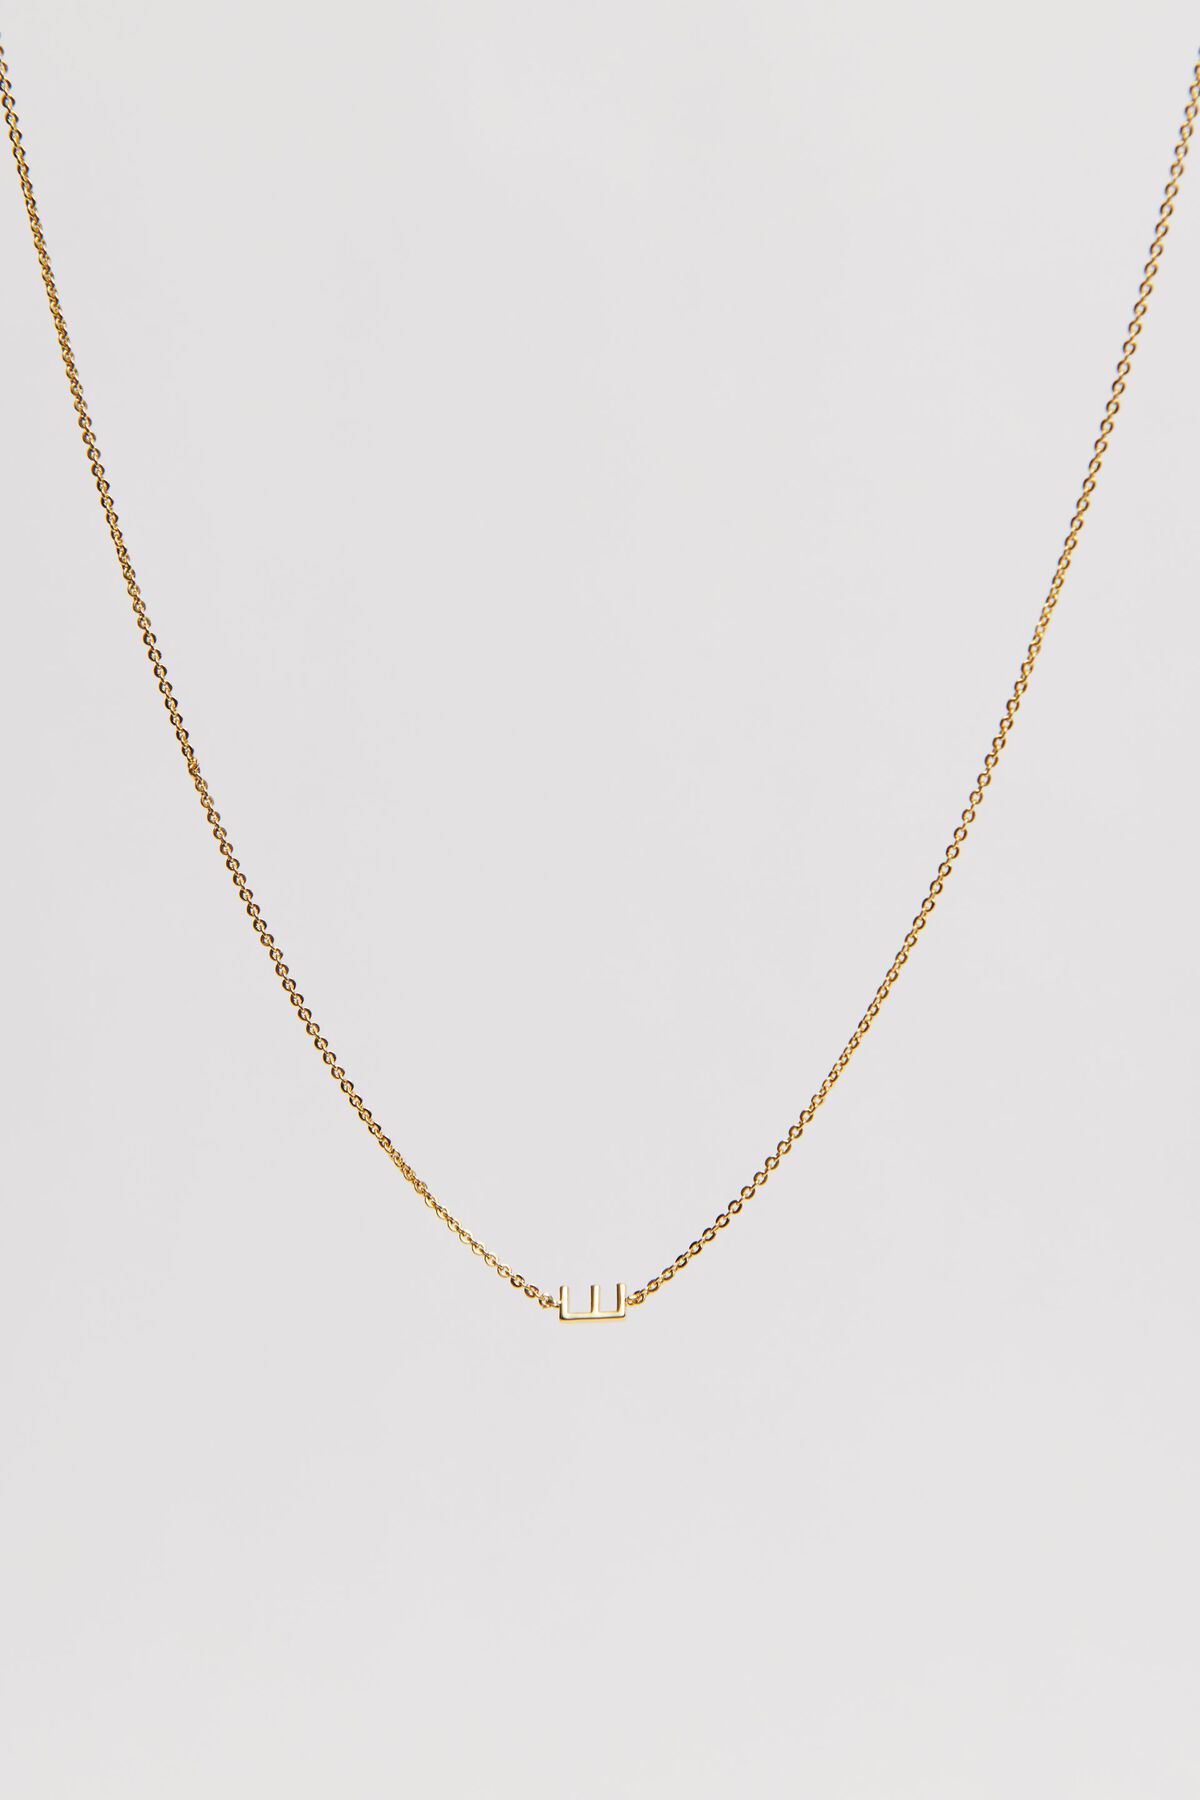 Garage 14K Gold Plated Initial Necklace. 2